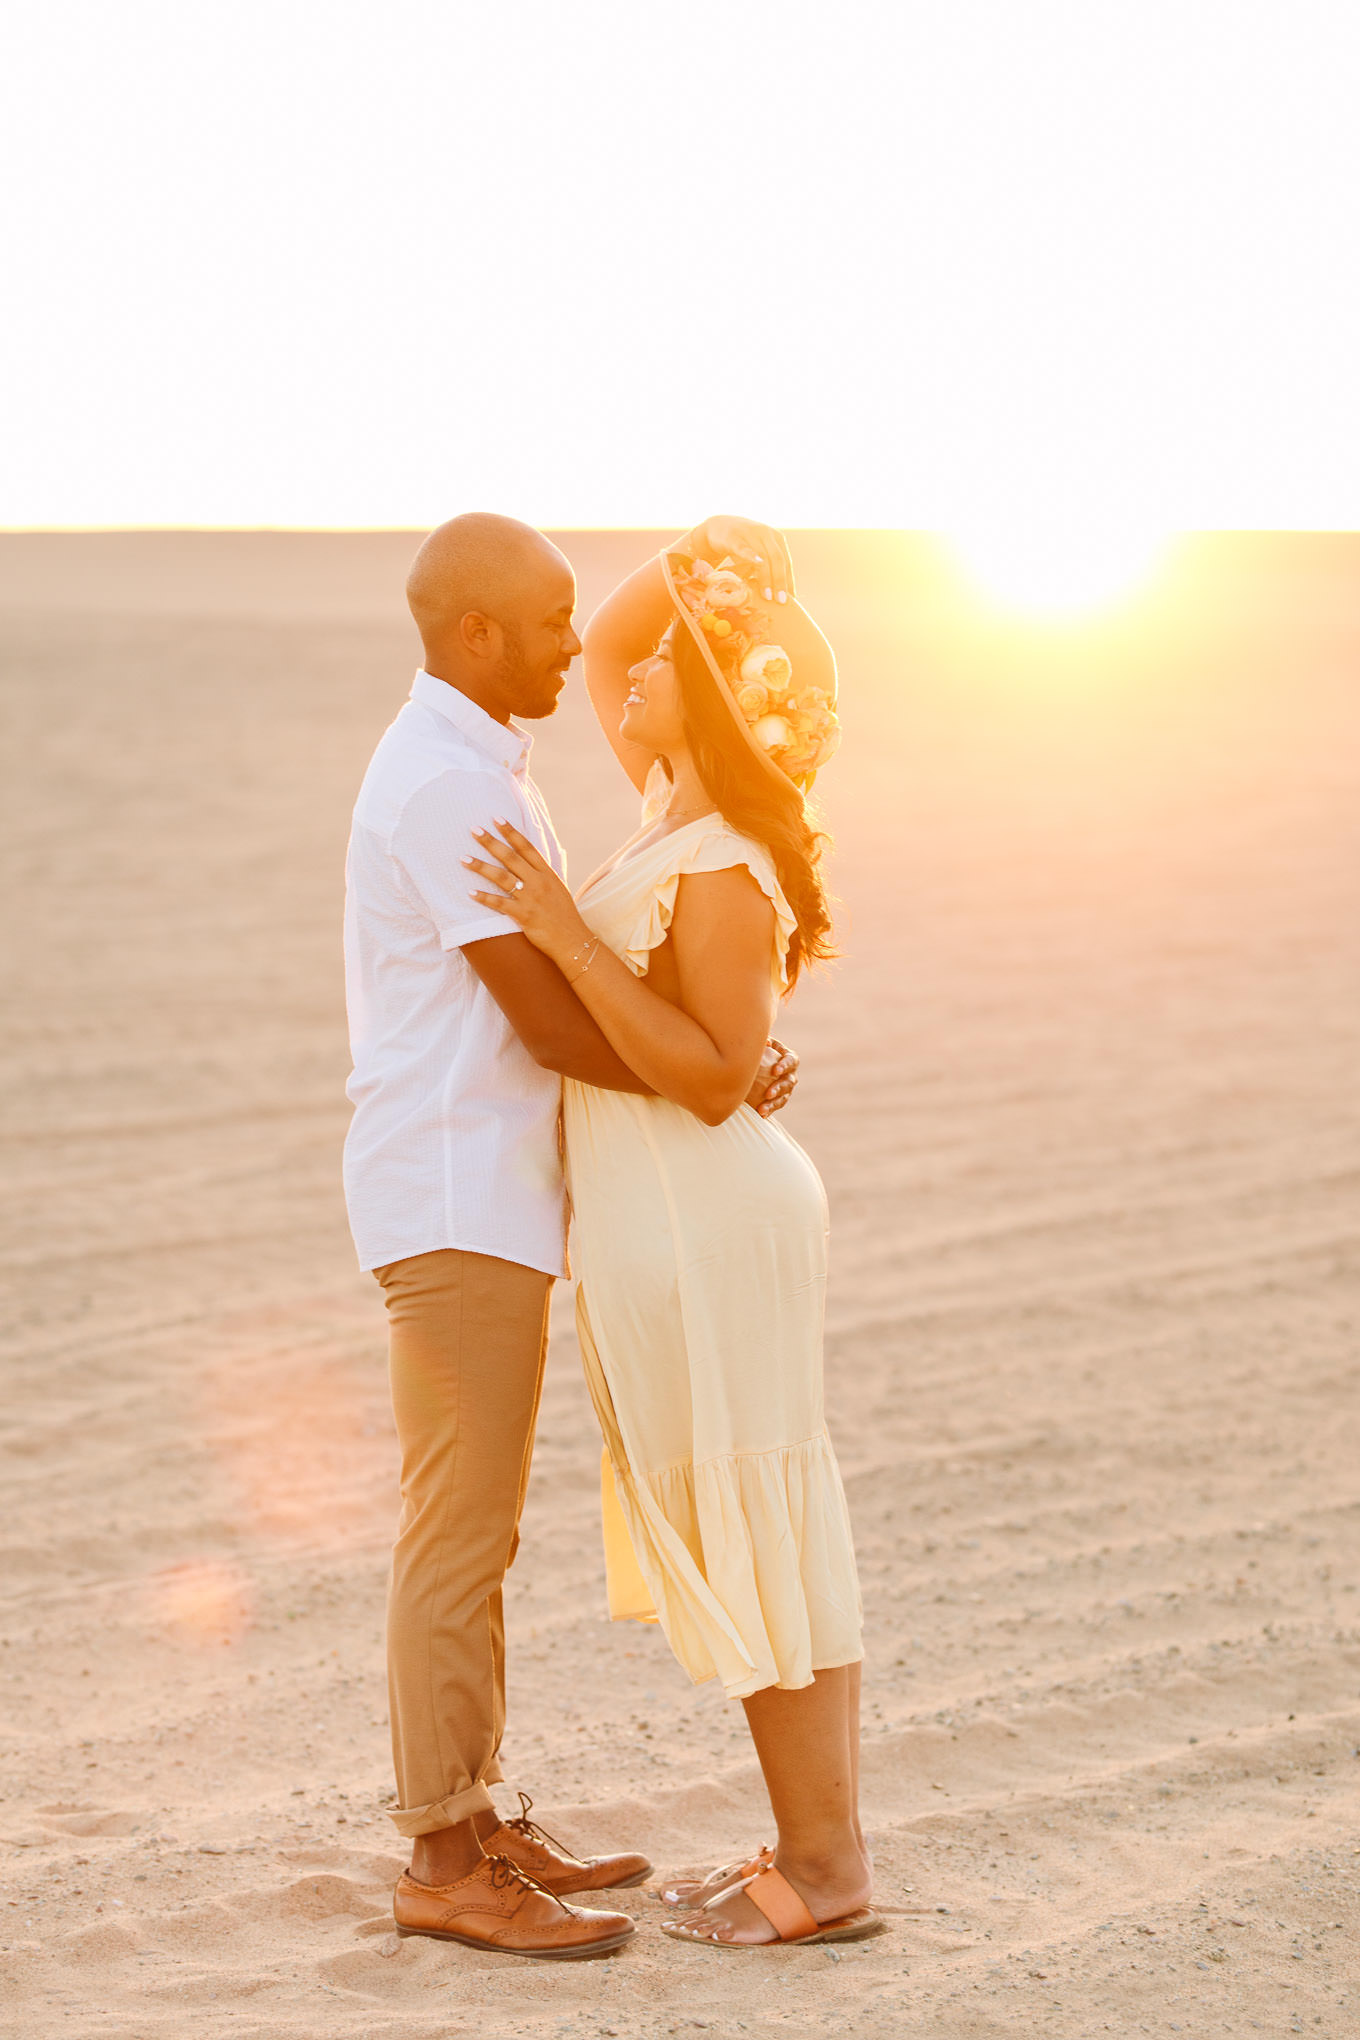 Golden hour photo of engaged couple on sand dune | California Sand Dunes engagement session | Colorful Palm Springs wedding photography | #palmspringsphotographer #sanddunes #engagementsession #southerncalifornia  Source: Mary Costa Photography | Los Angeles